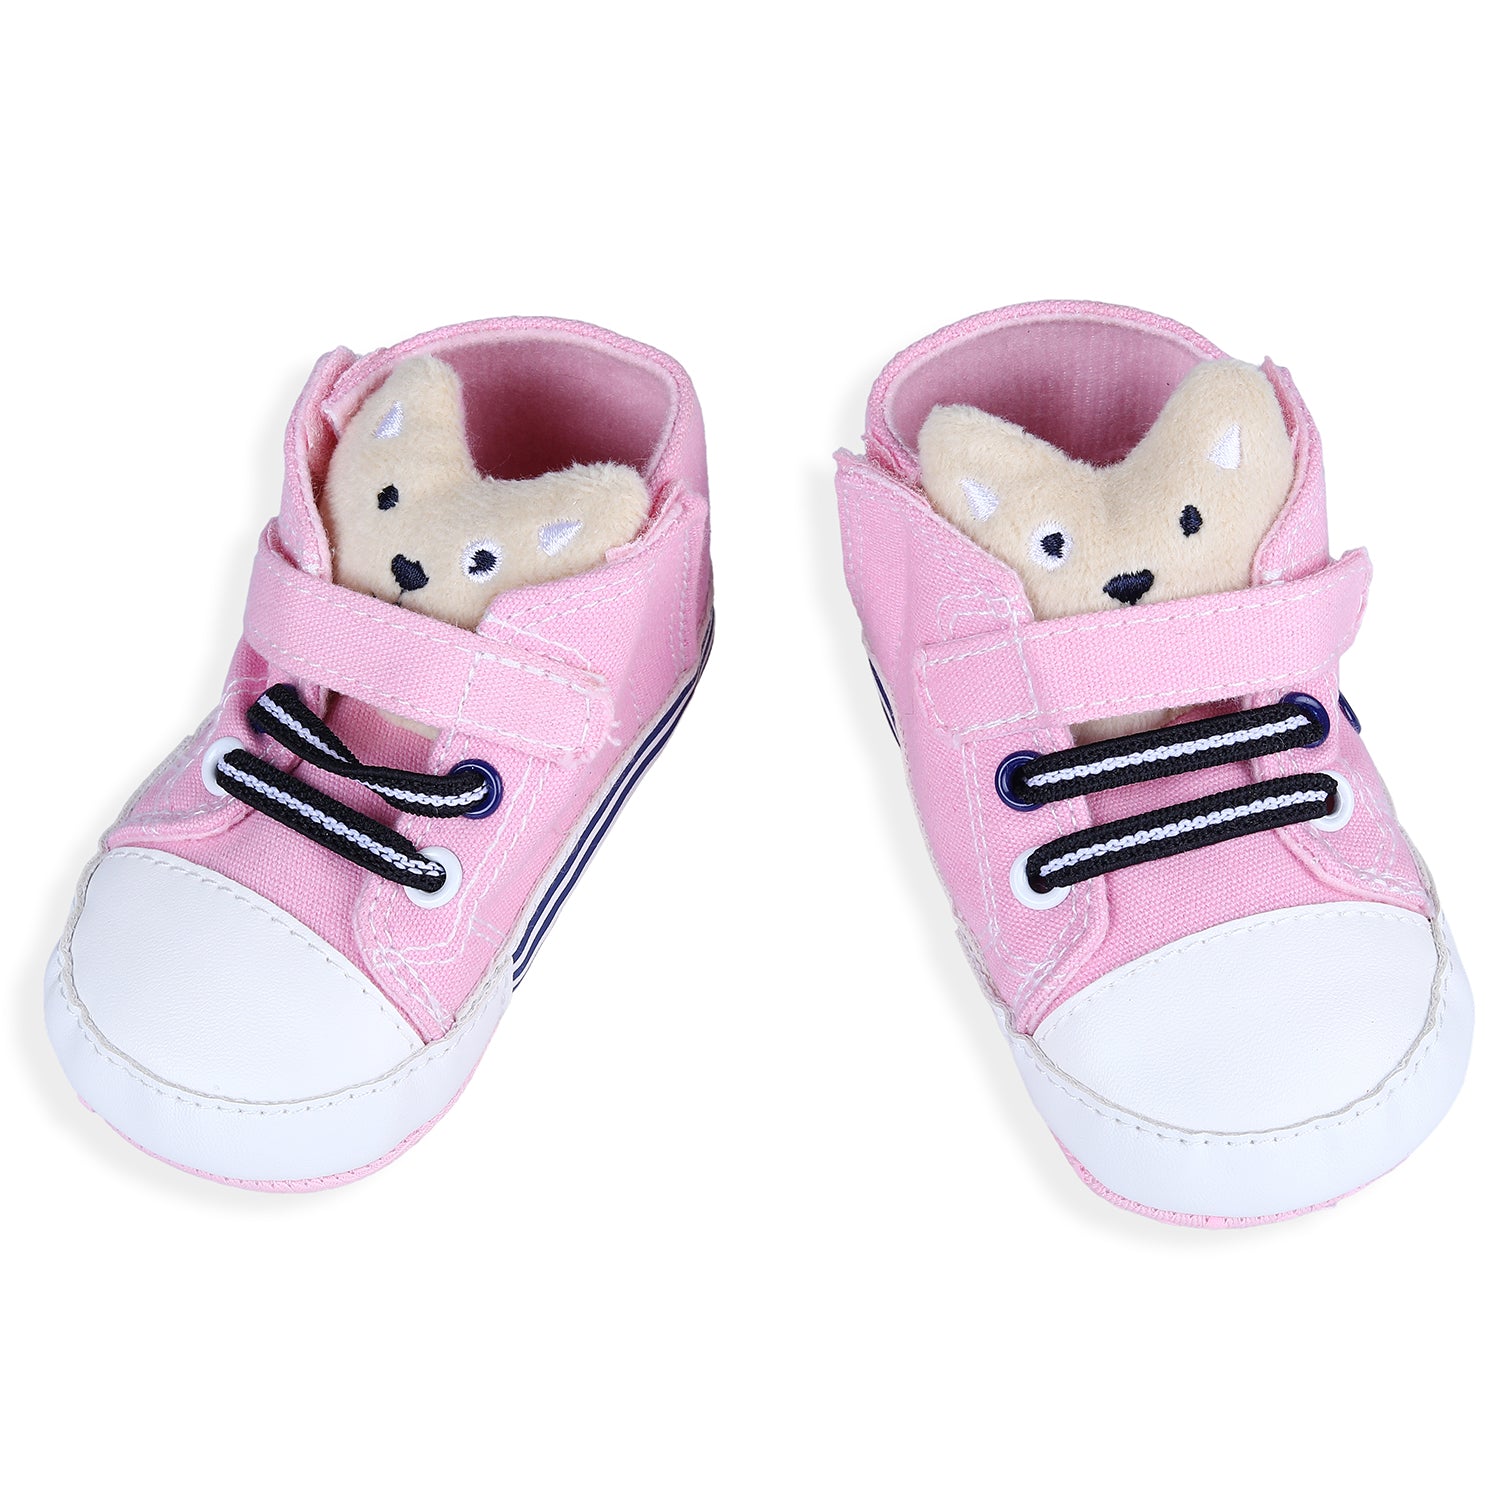 My Buddy Bear Cute And Stylish Comfy Booties - Pink